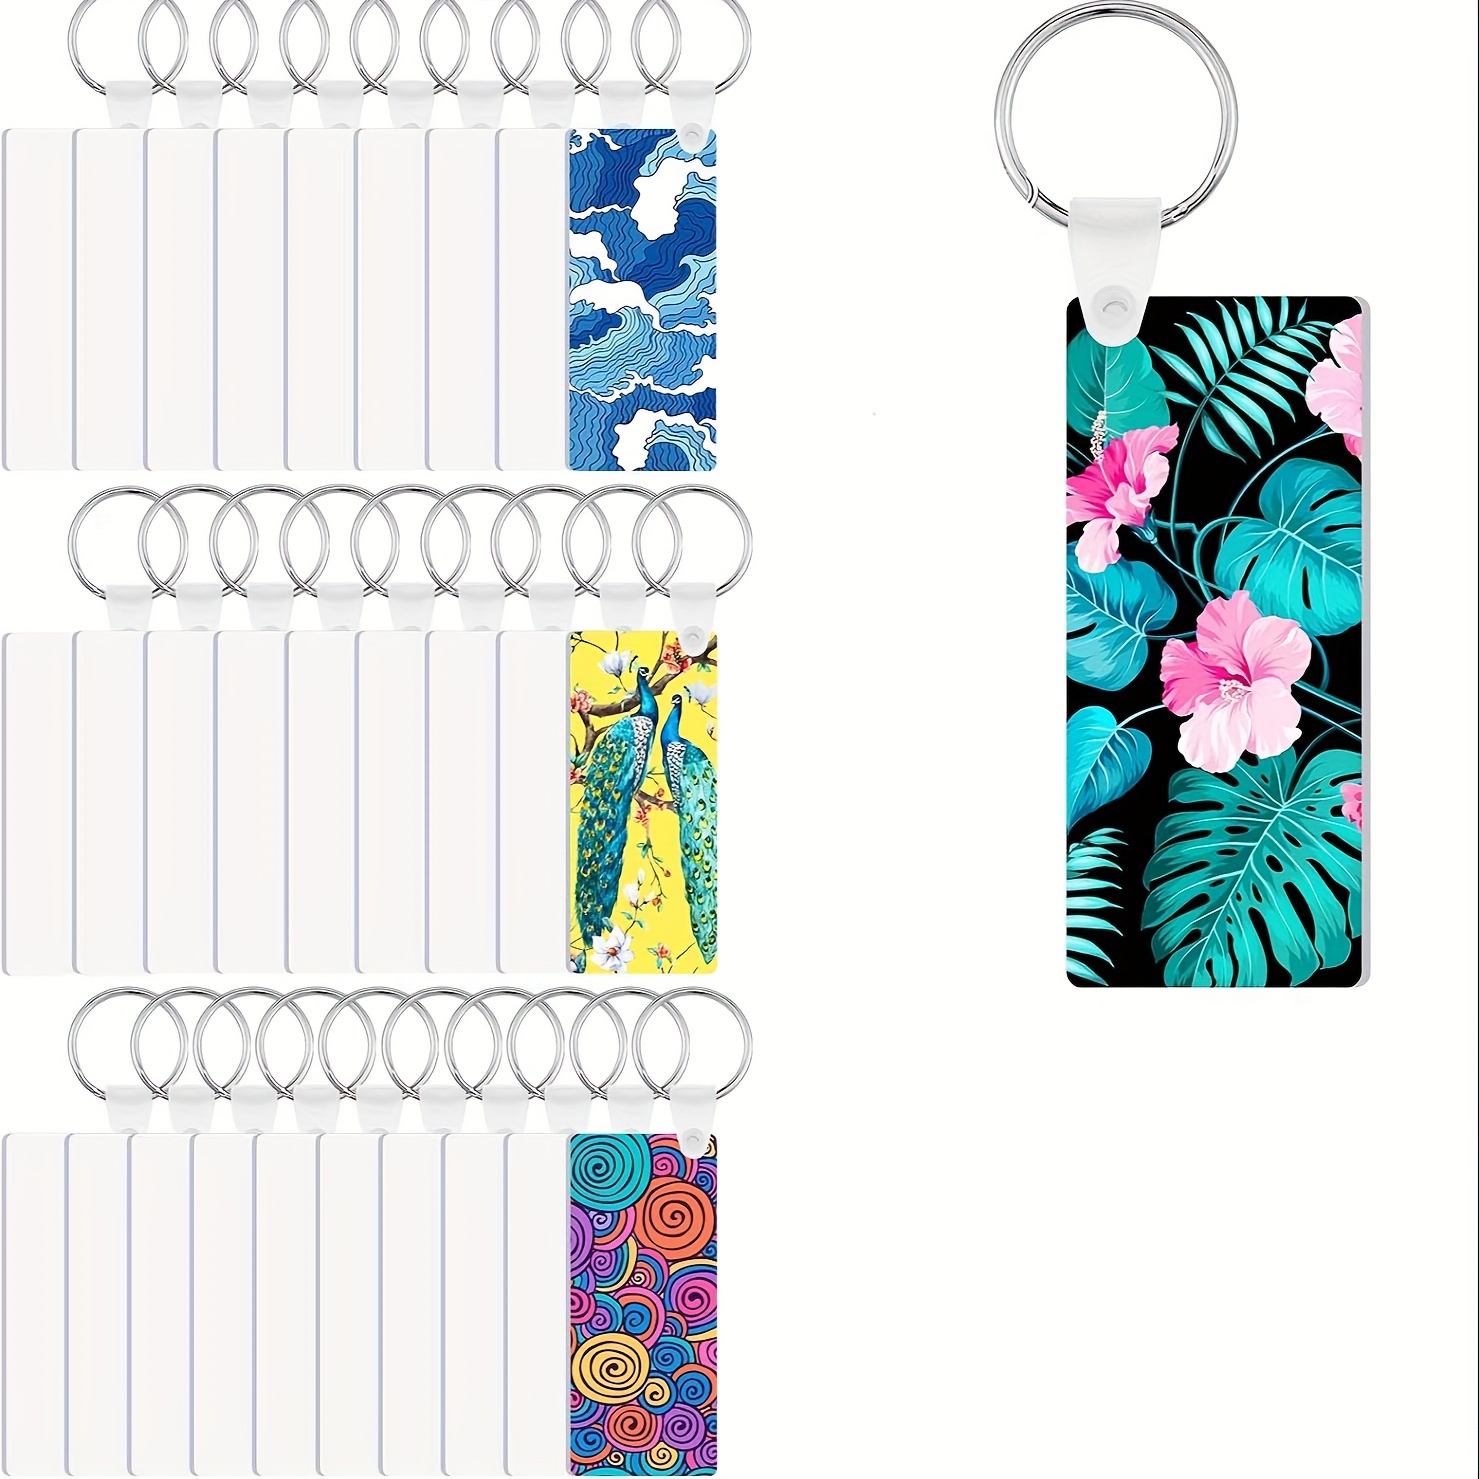 44pcs Sublimation Stamping Blank Aluminum Dog Tags, Double Sided Sublimation Metal Name Tag with Chain Necklace Chain Key Rings Heat Tape for Pet ID